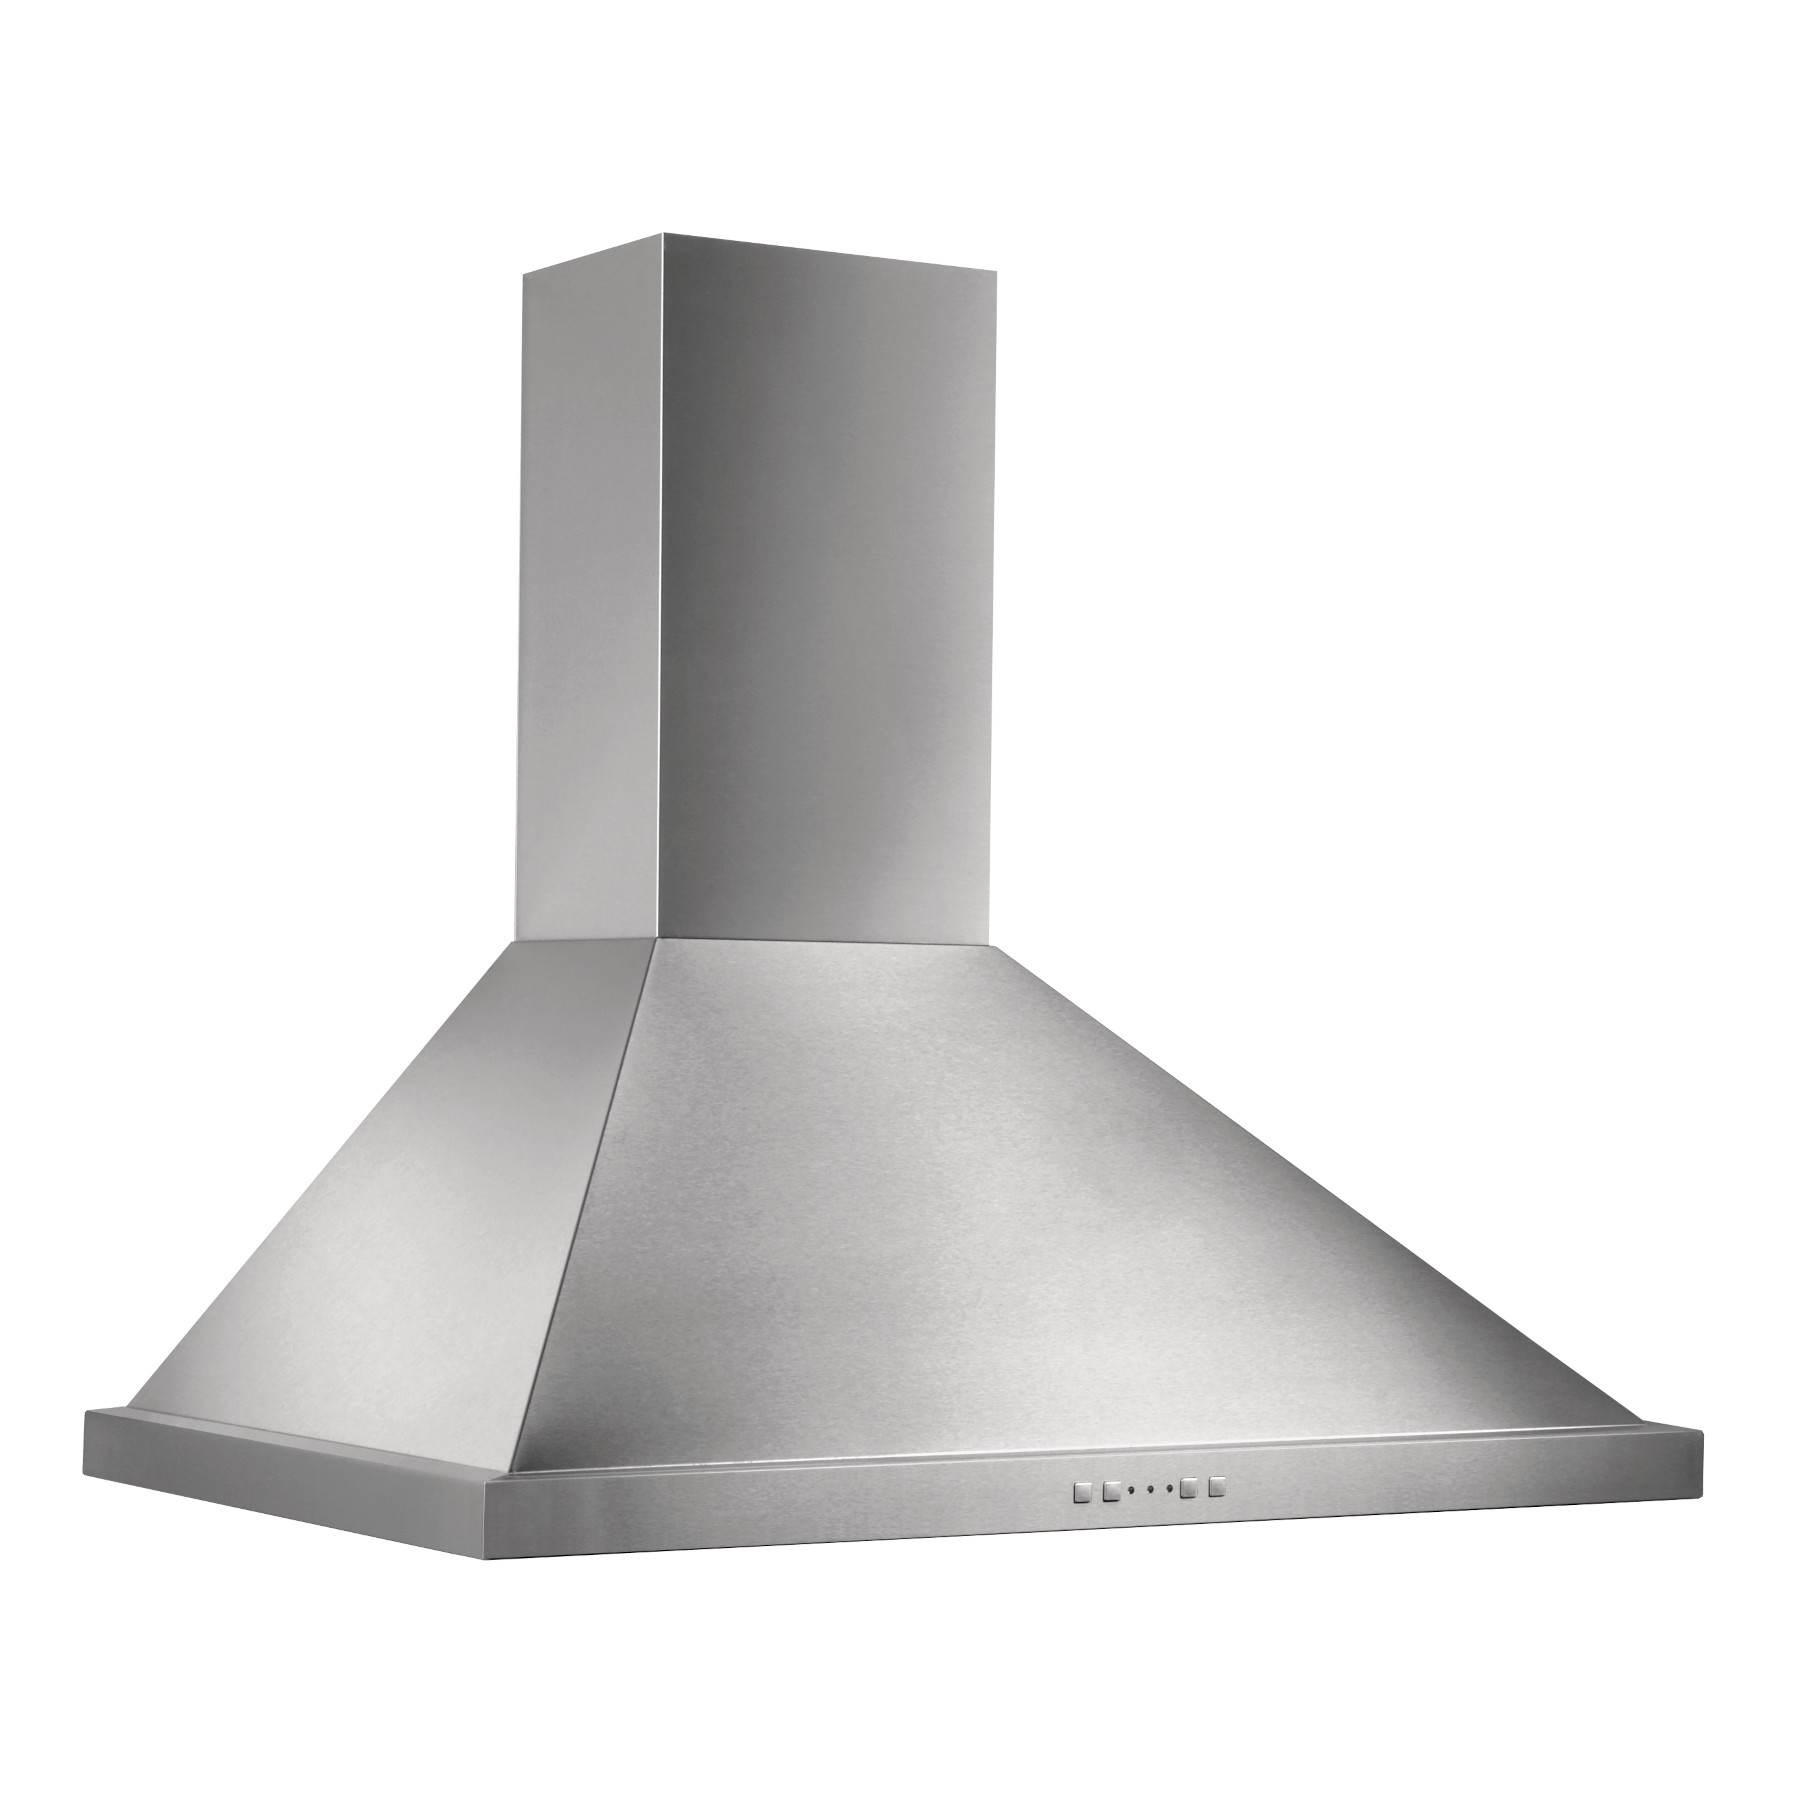 **DISCONTINUED** Broan® 30-Inch Convertible Canopy Wall-Mount Range Hood w/ Heat Sentry®, 500 CFM, Stainless Steel